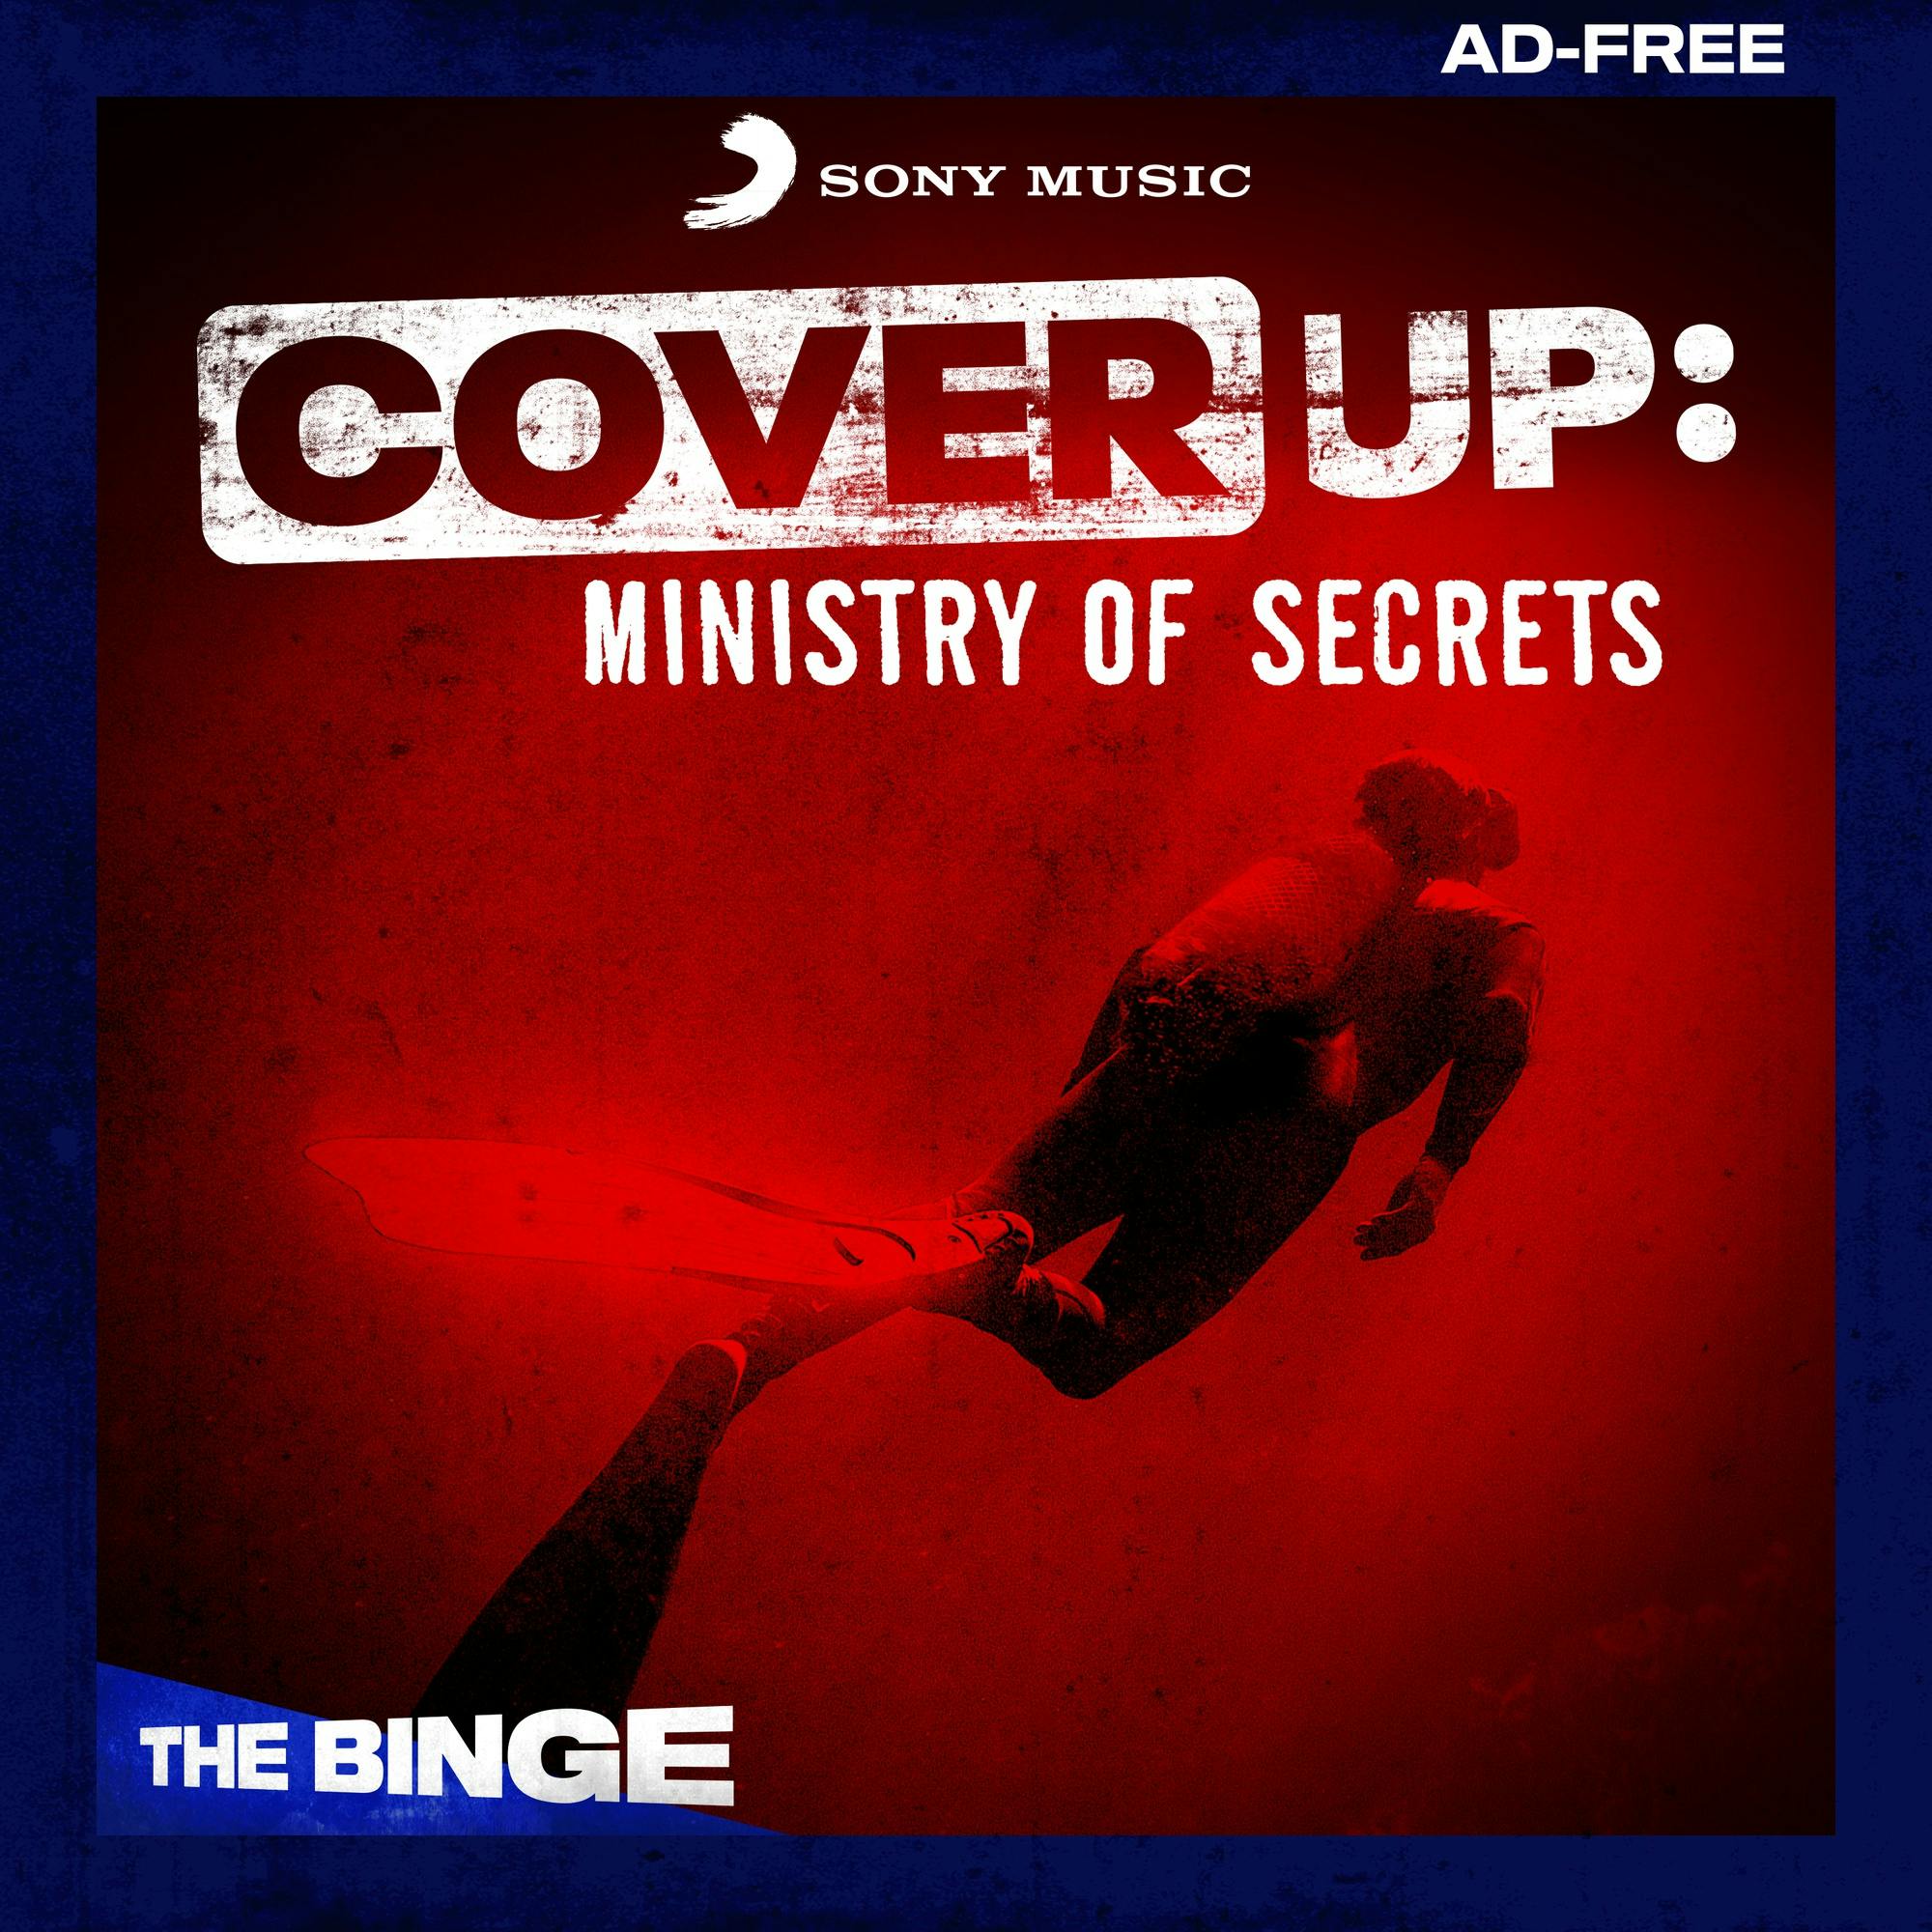 Cover Up: Ministry of Secrets (Ad-Free, THE BINGE) podcast tile